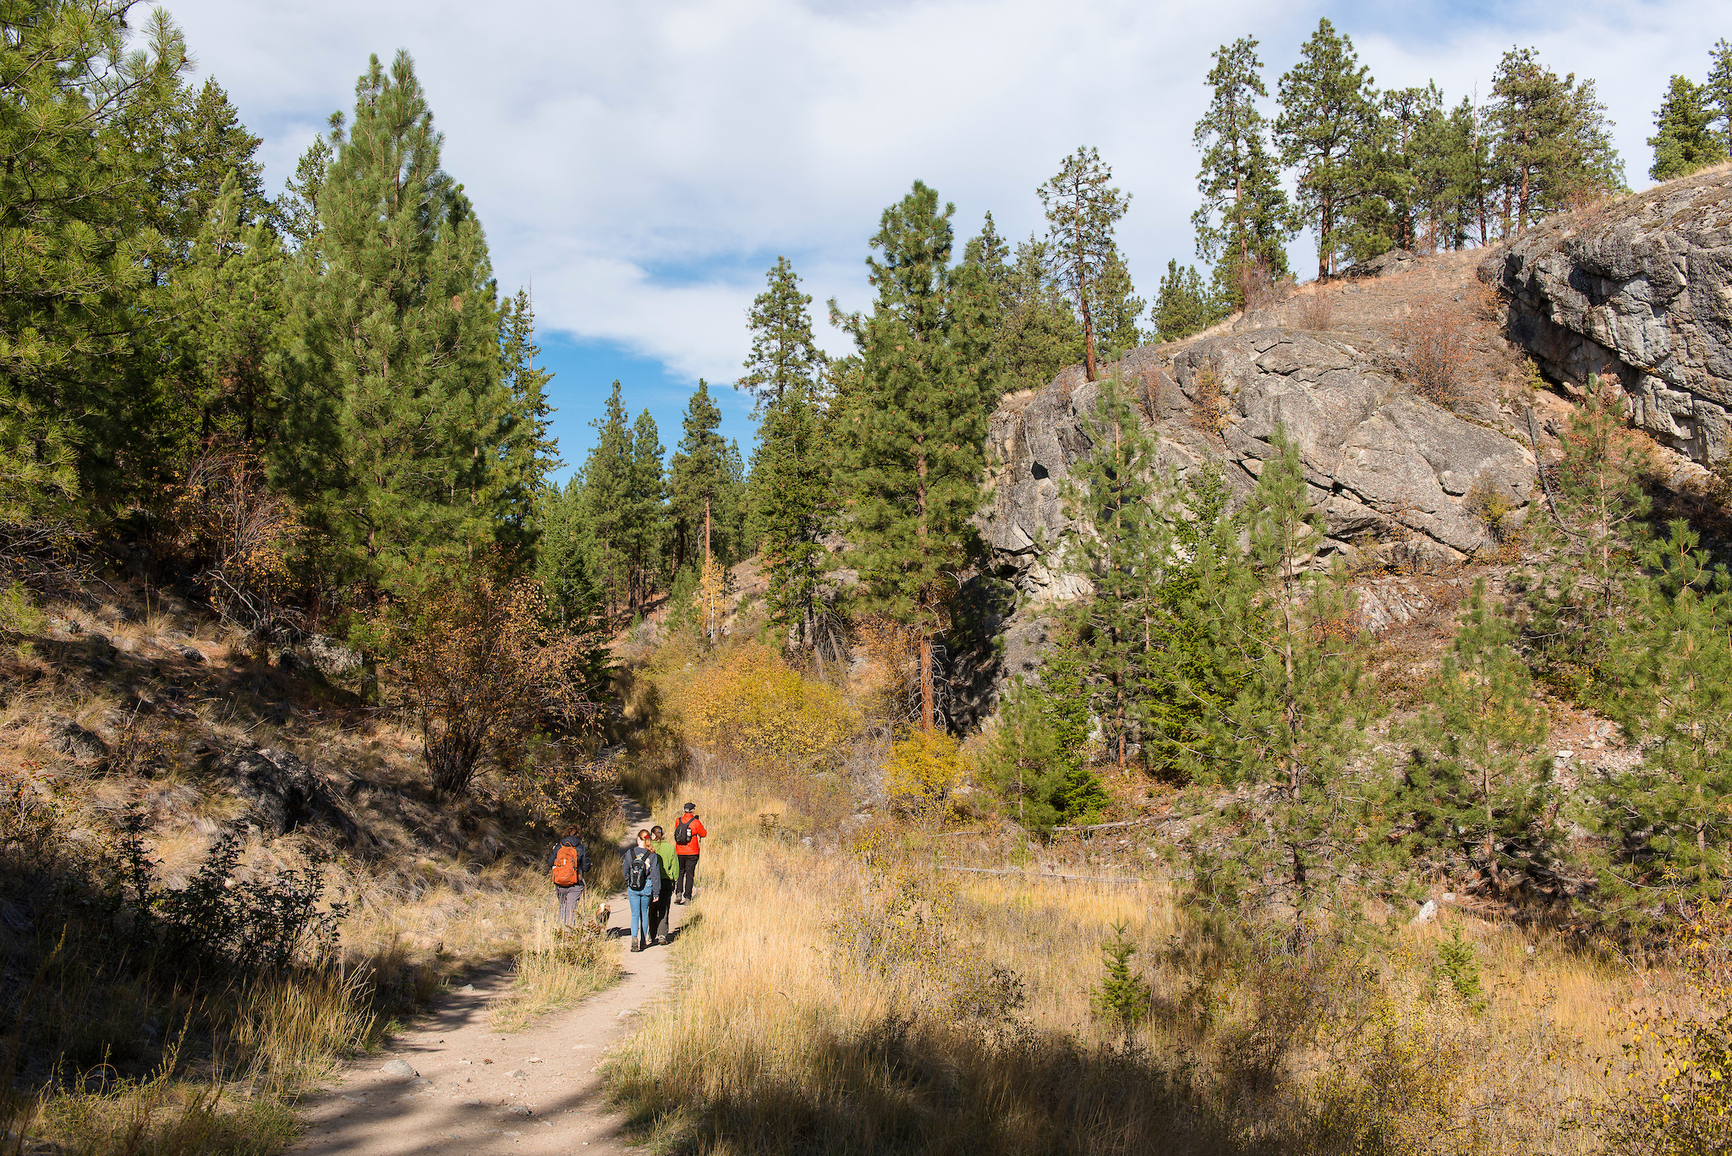 Group of hikers using trail system through section with bluffs, trees, and tall grasses.